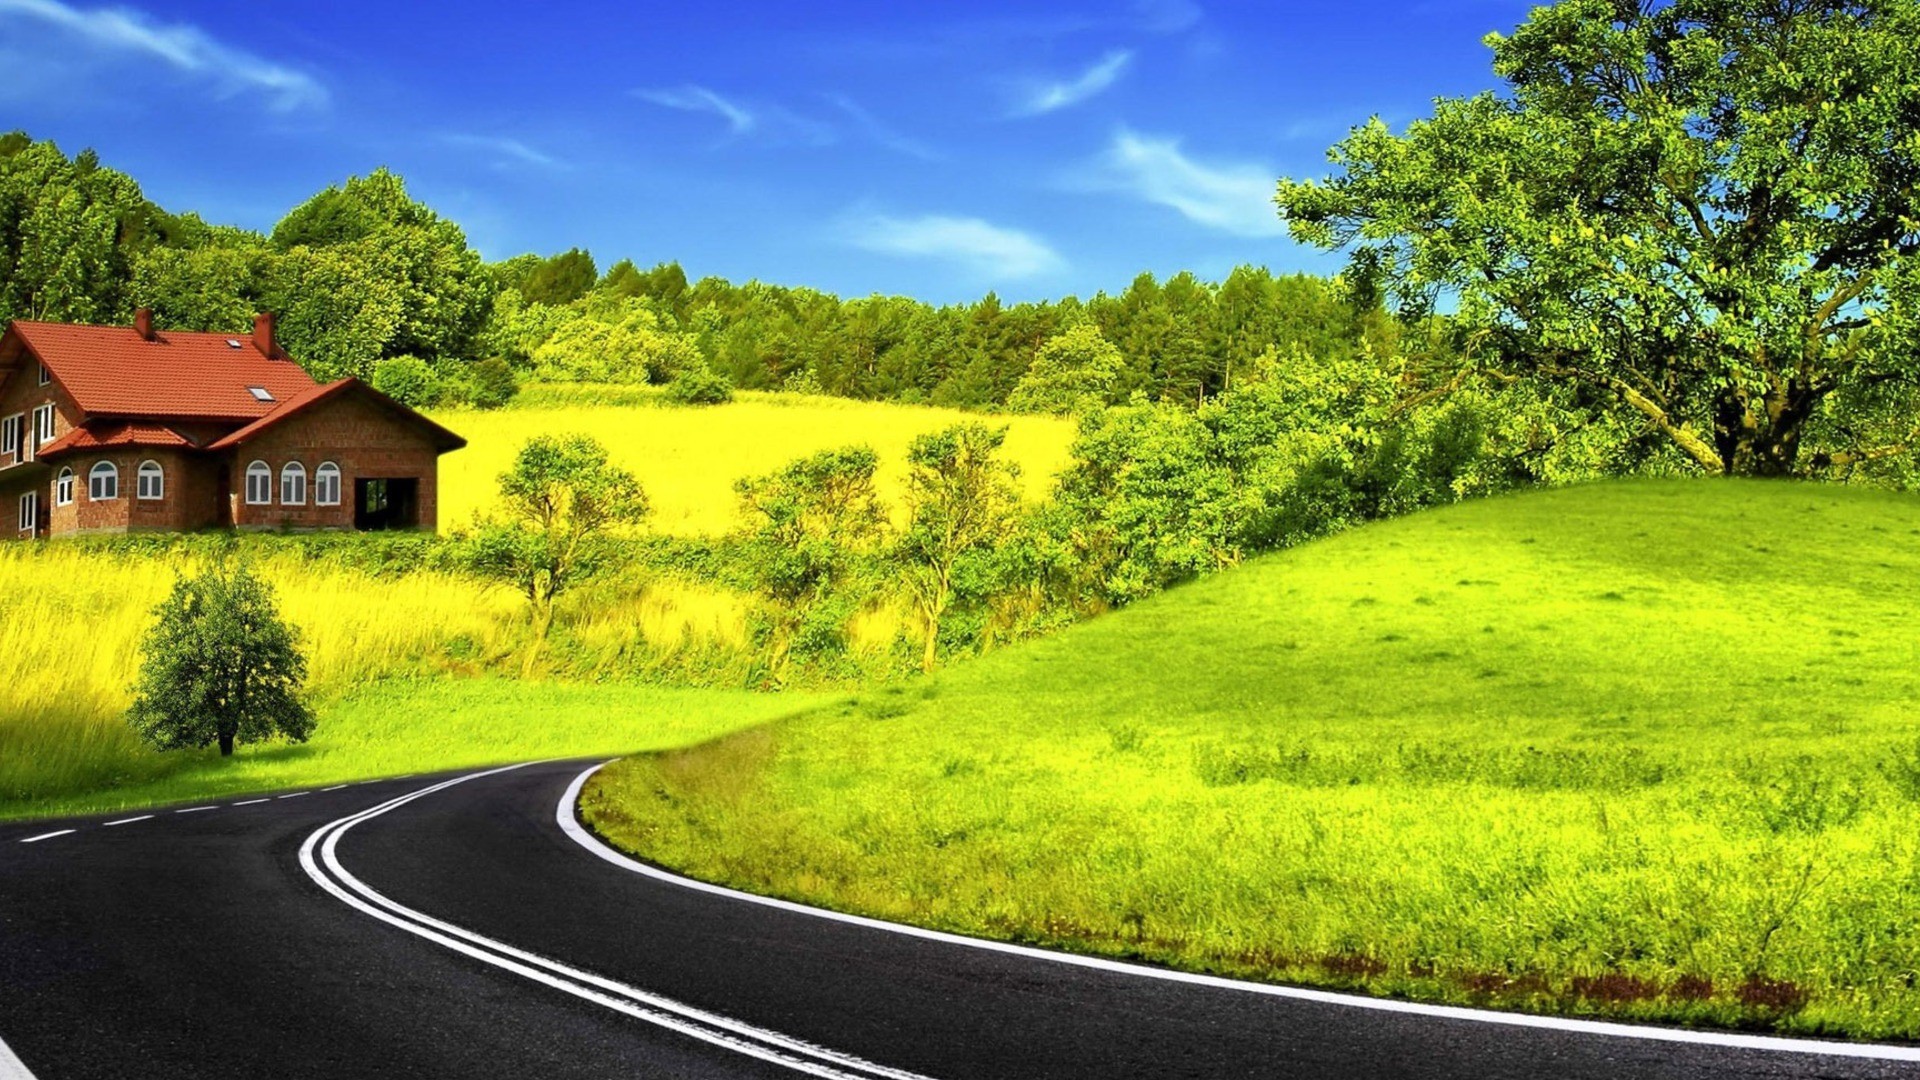 Road Background Hd Cb Traditional Background Wallpaper Hd